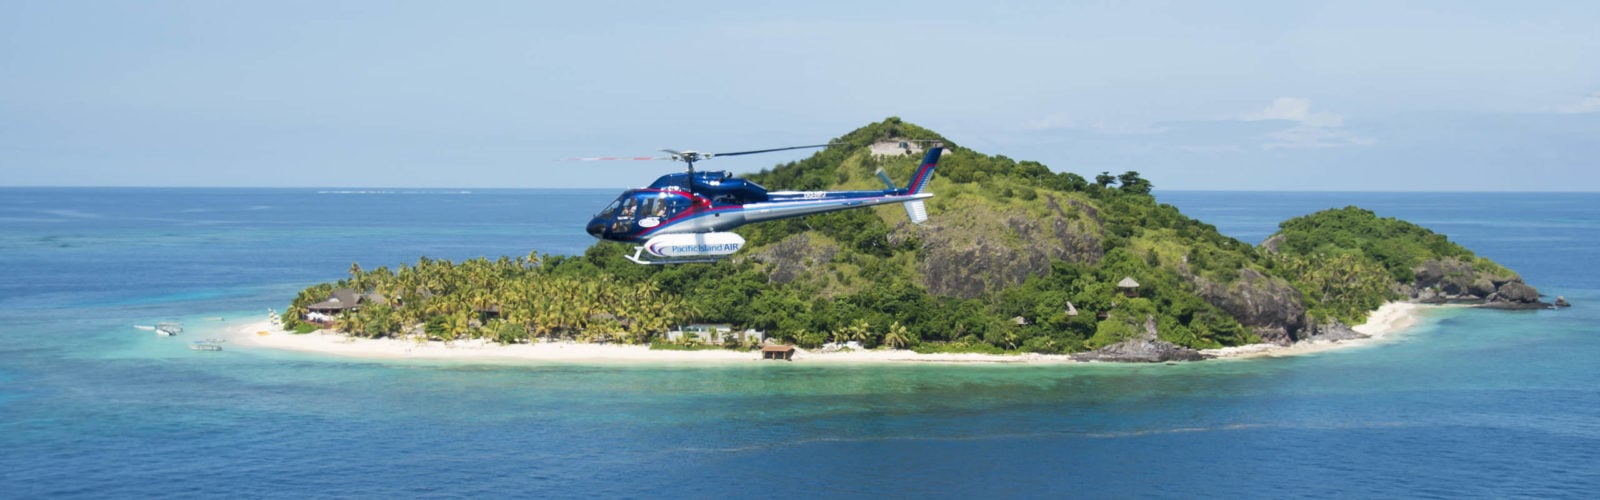 Pacific Island Air Helicopter Fiji